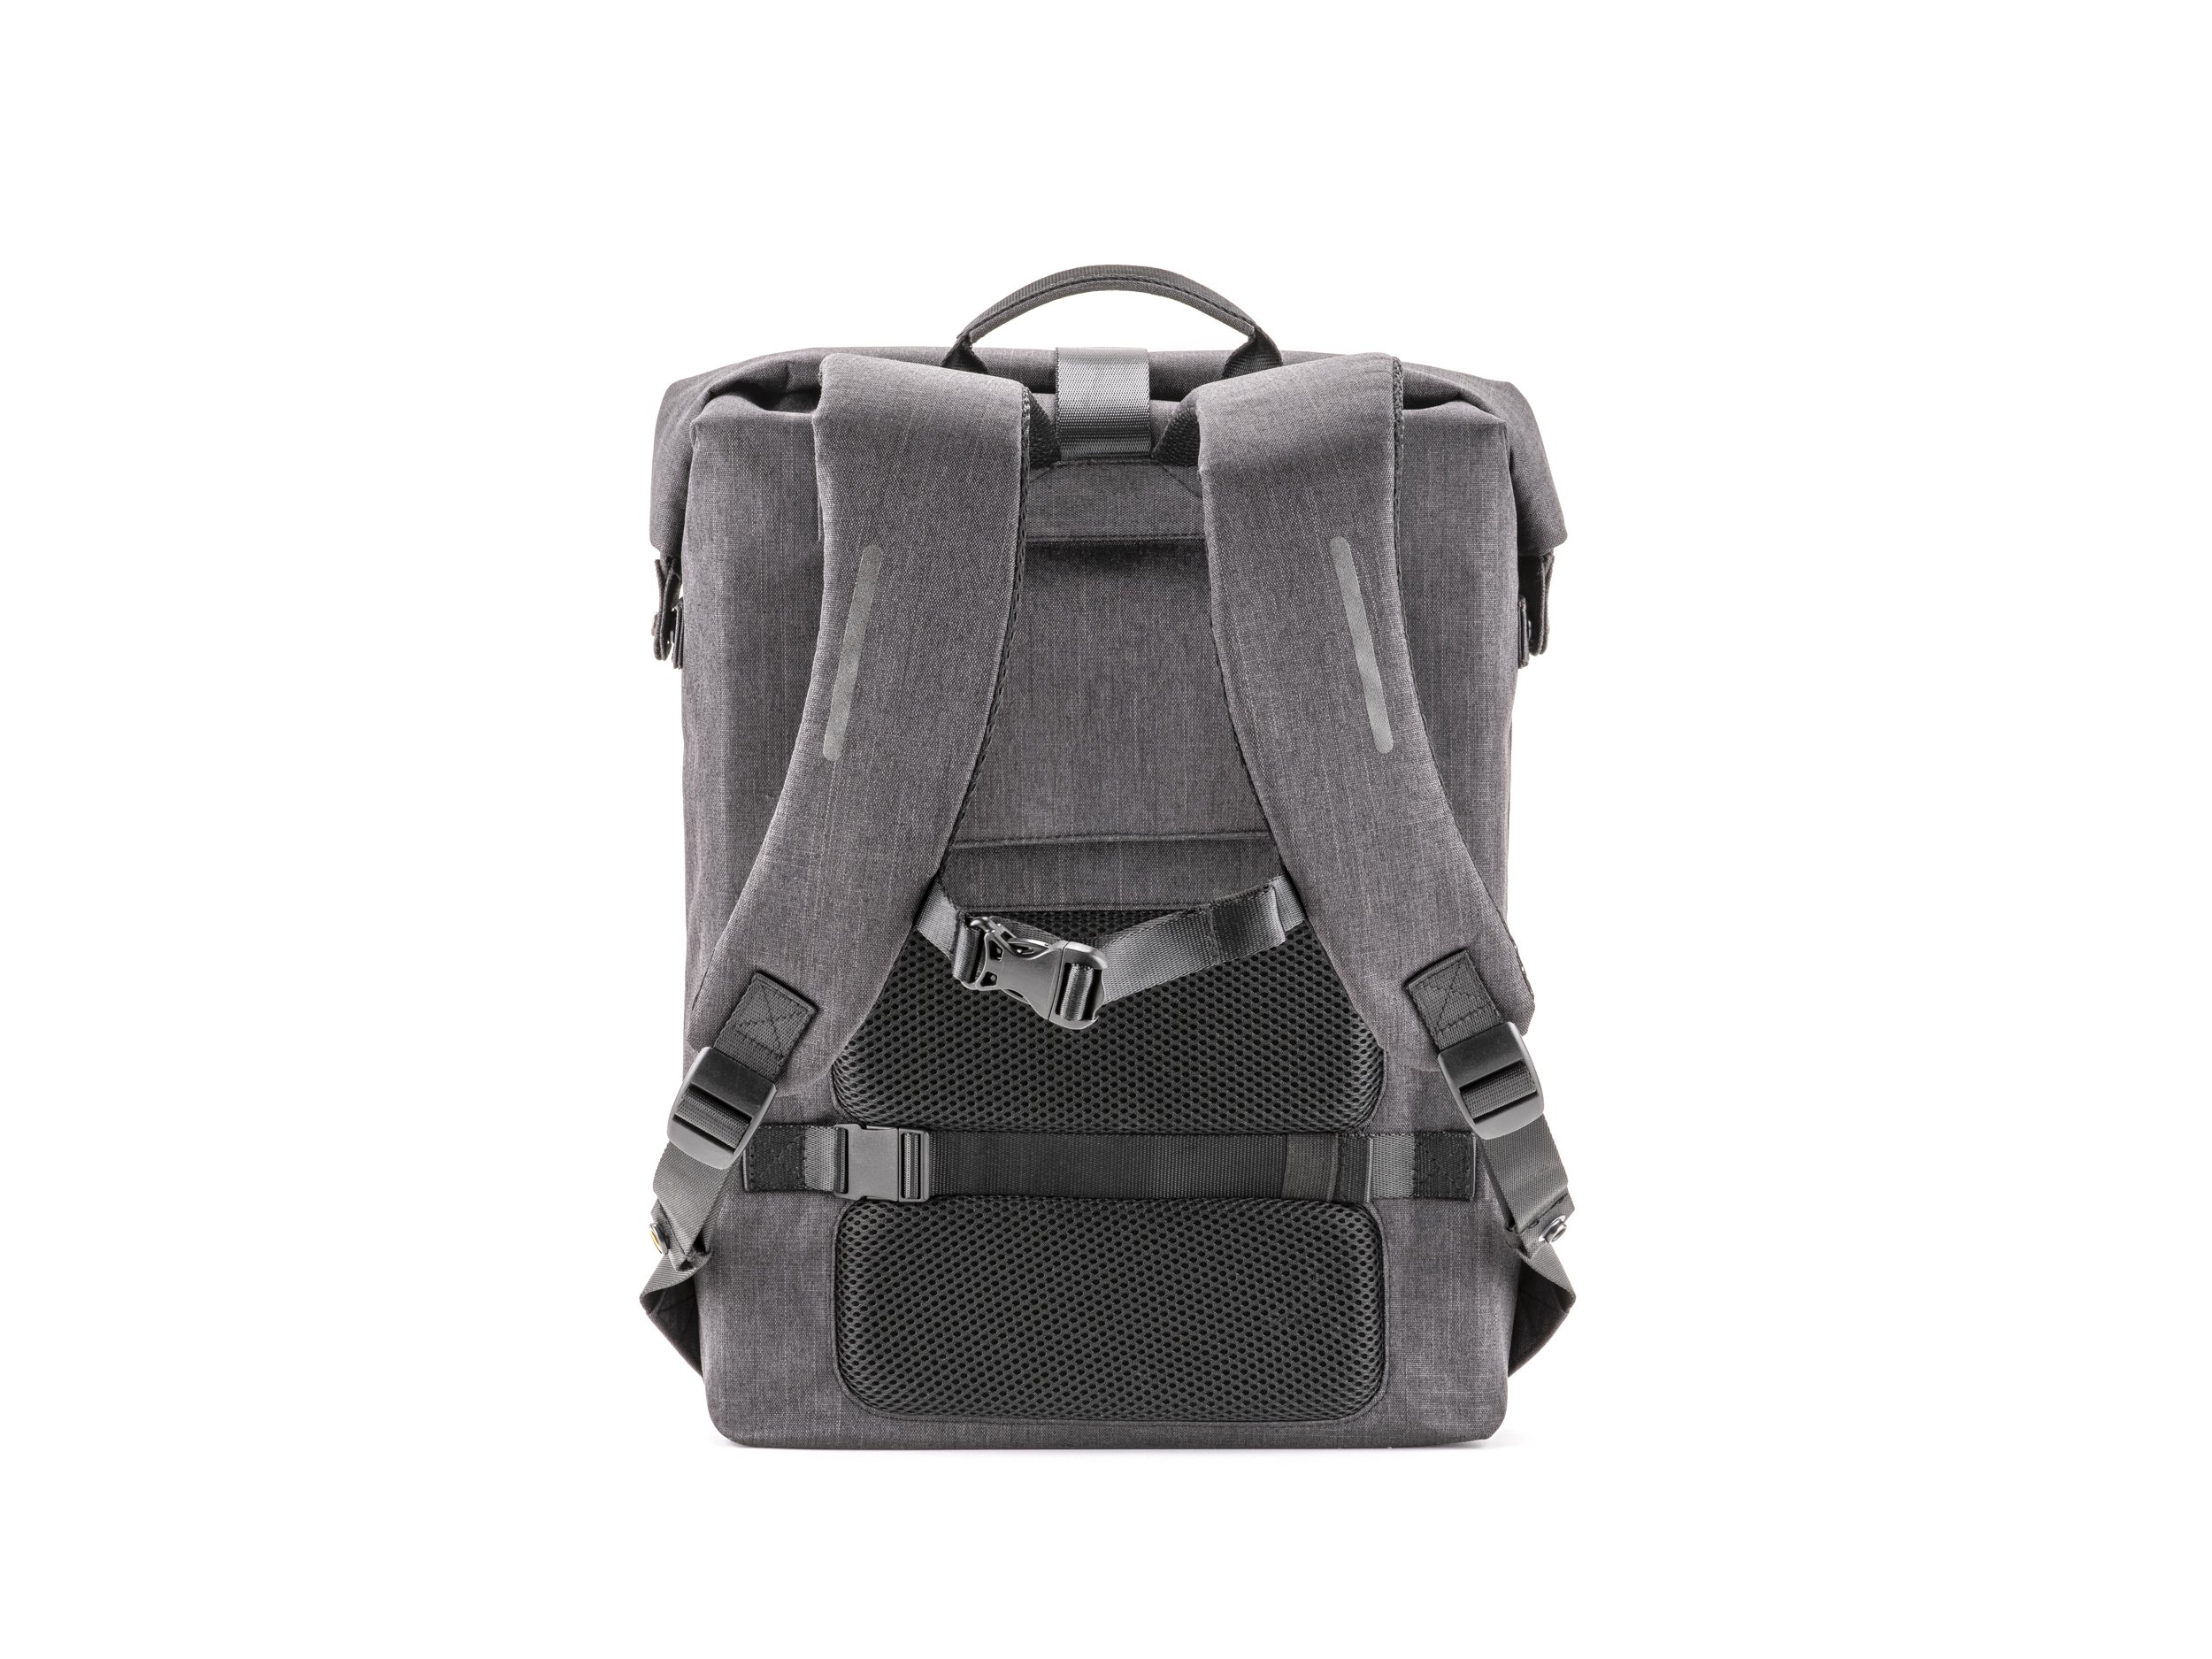 The Trend 284238 - Black And Cognac Backpack at FORZIERI